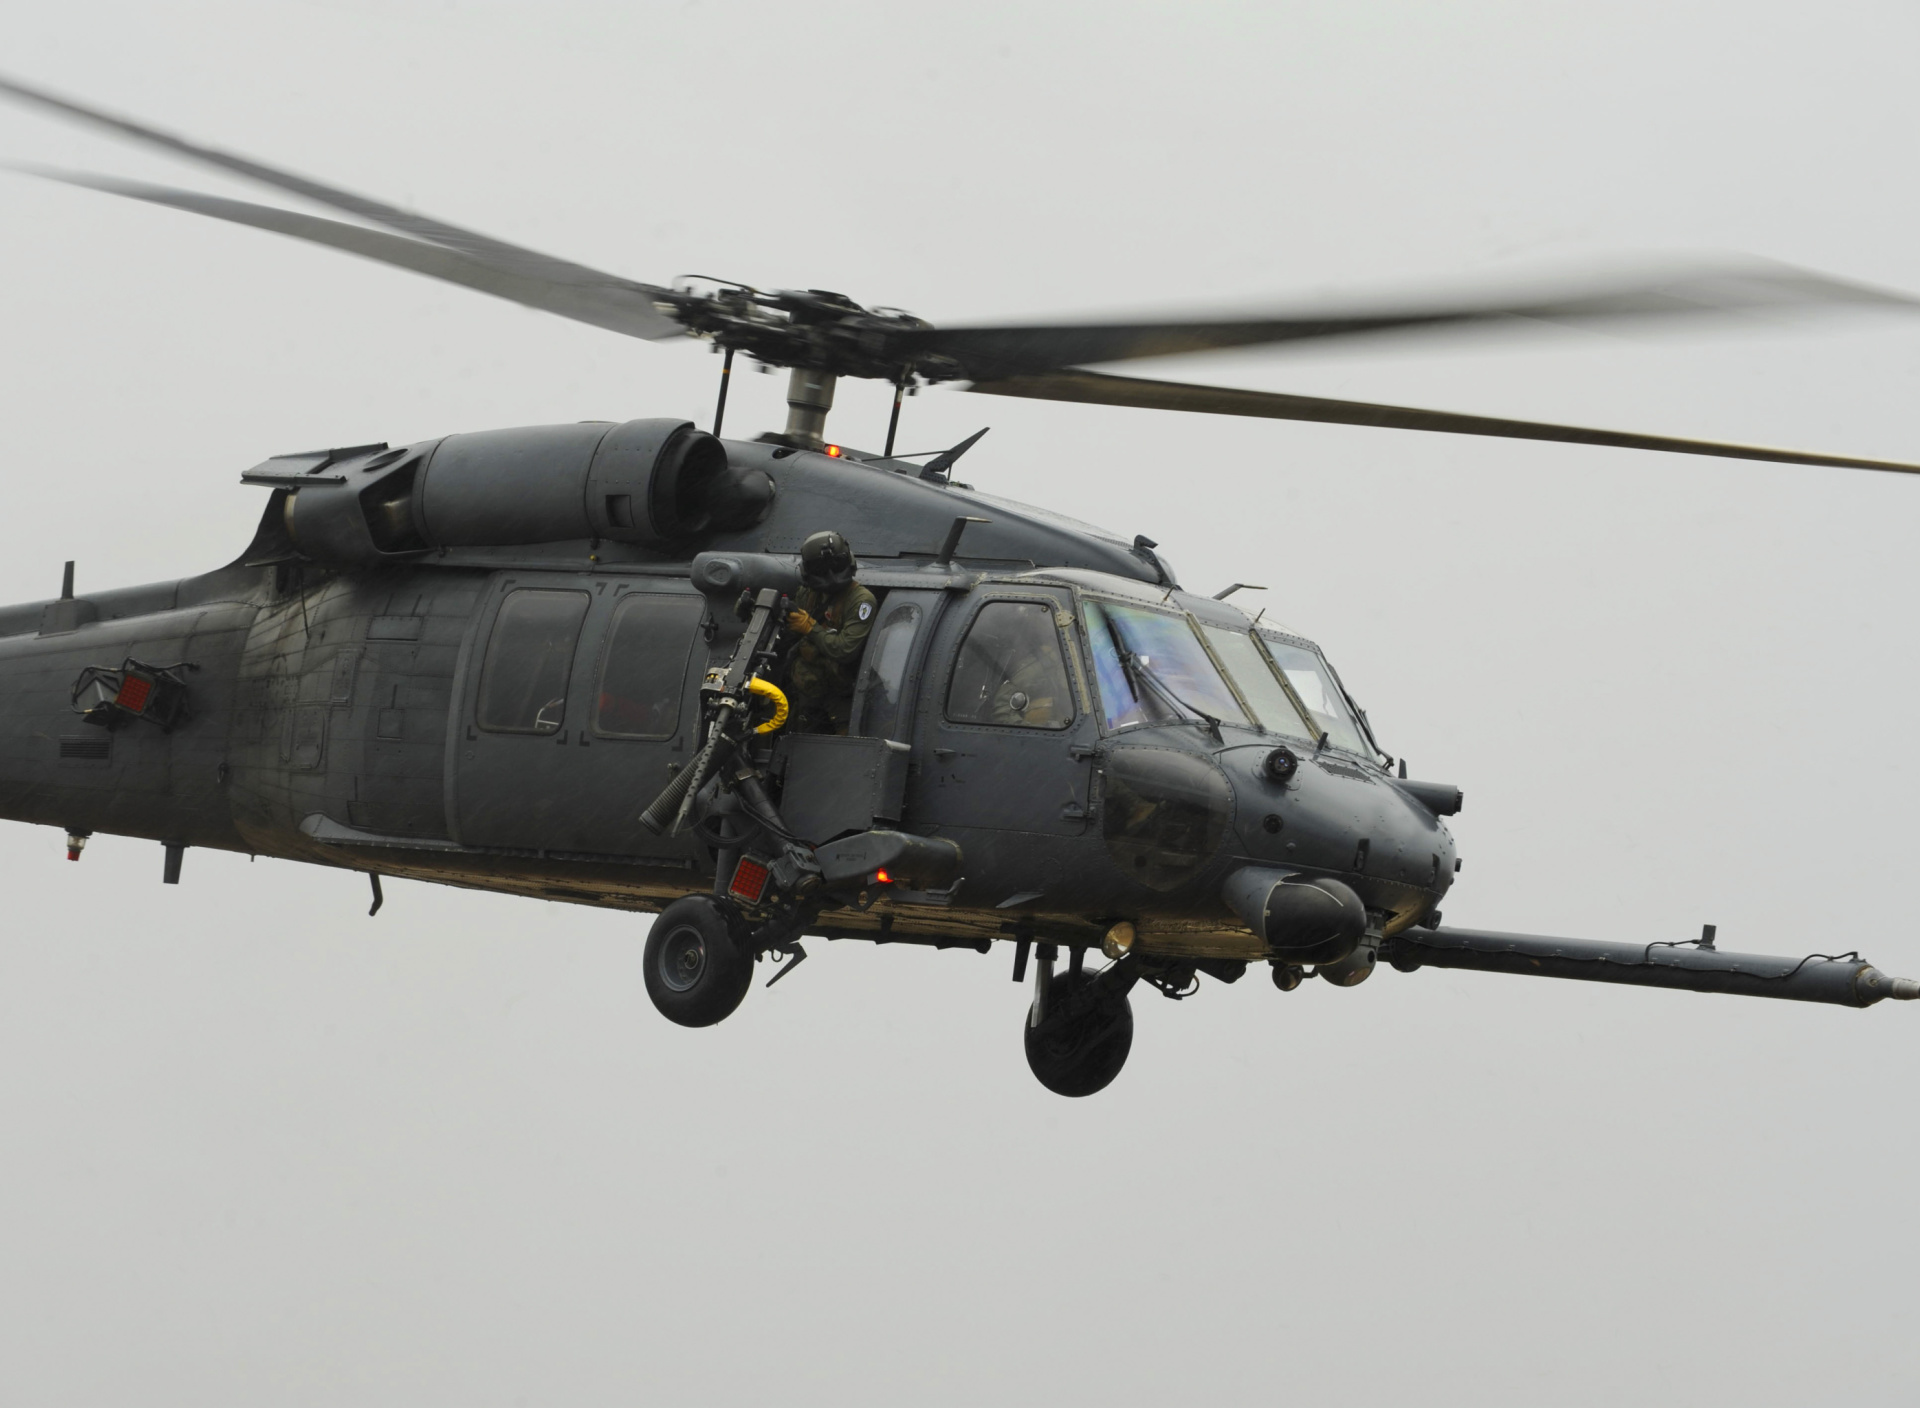 Das Helicopter Sikorsky HH 60 Pave Hawk Wallpaper 1920x1408